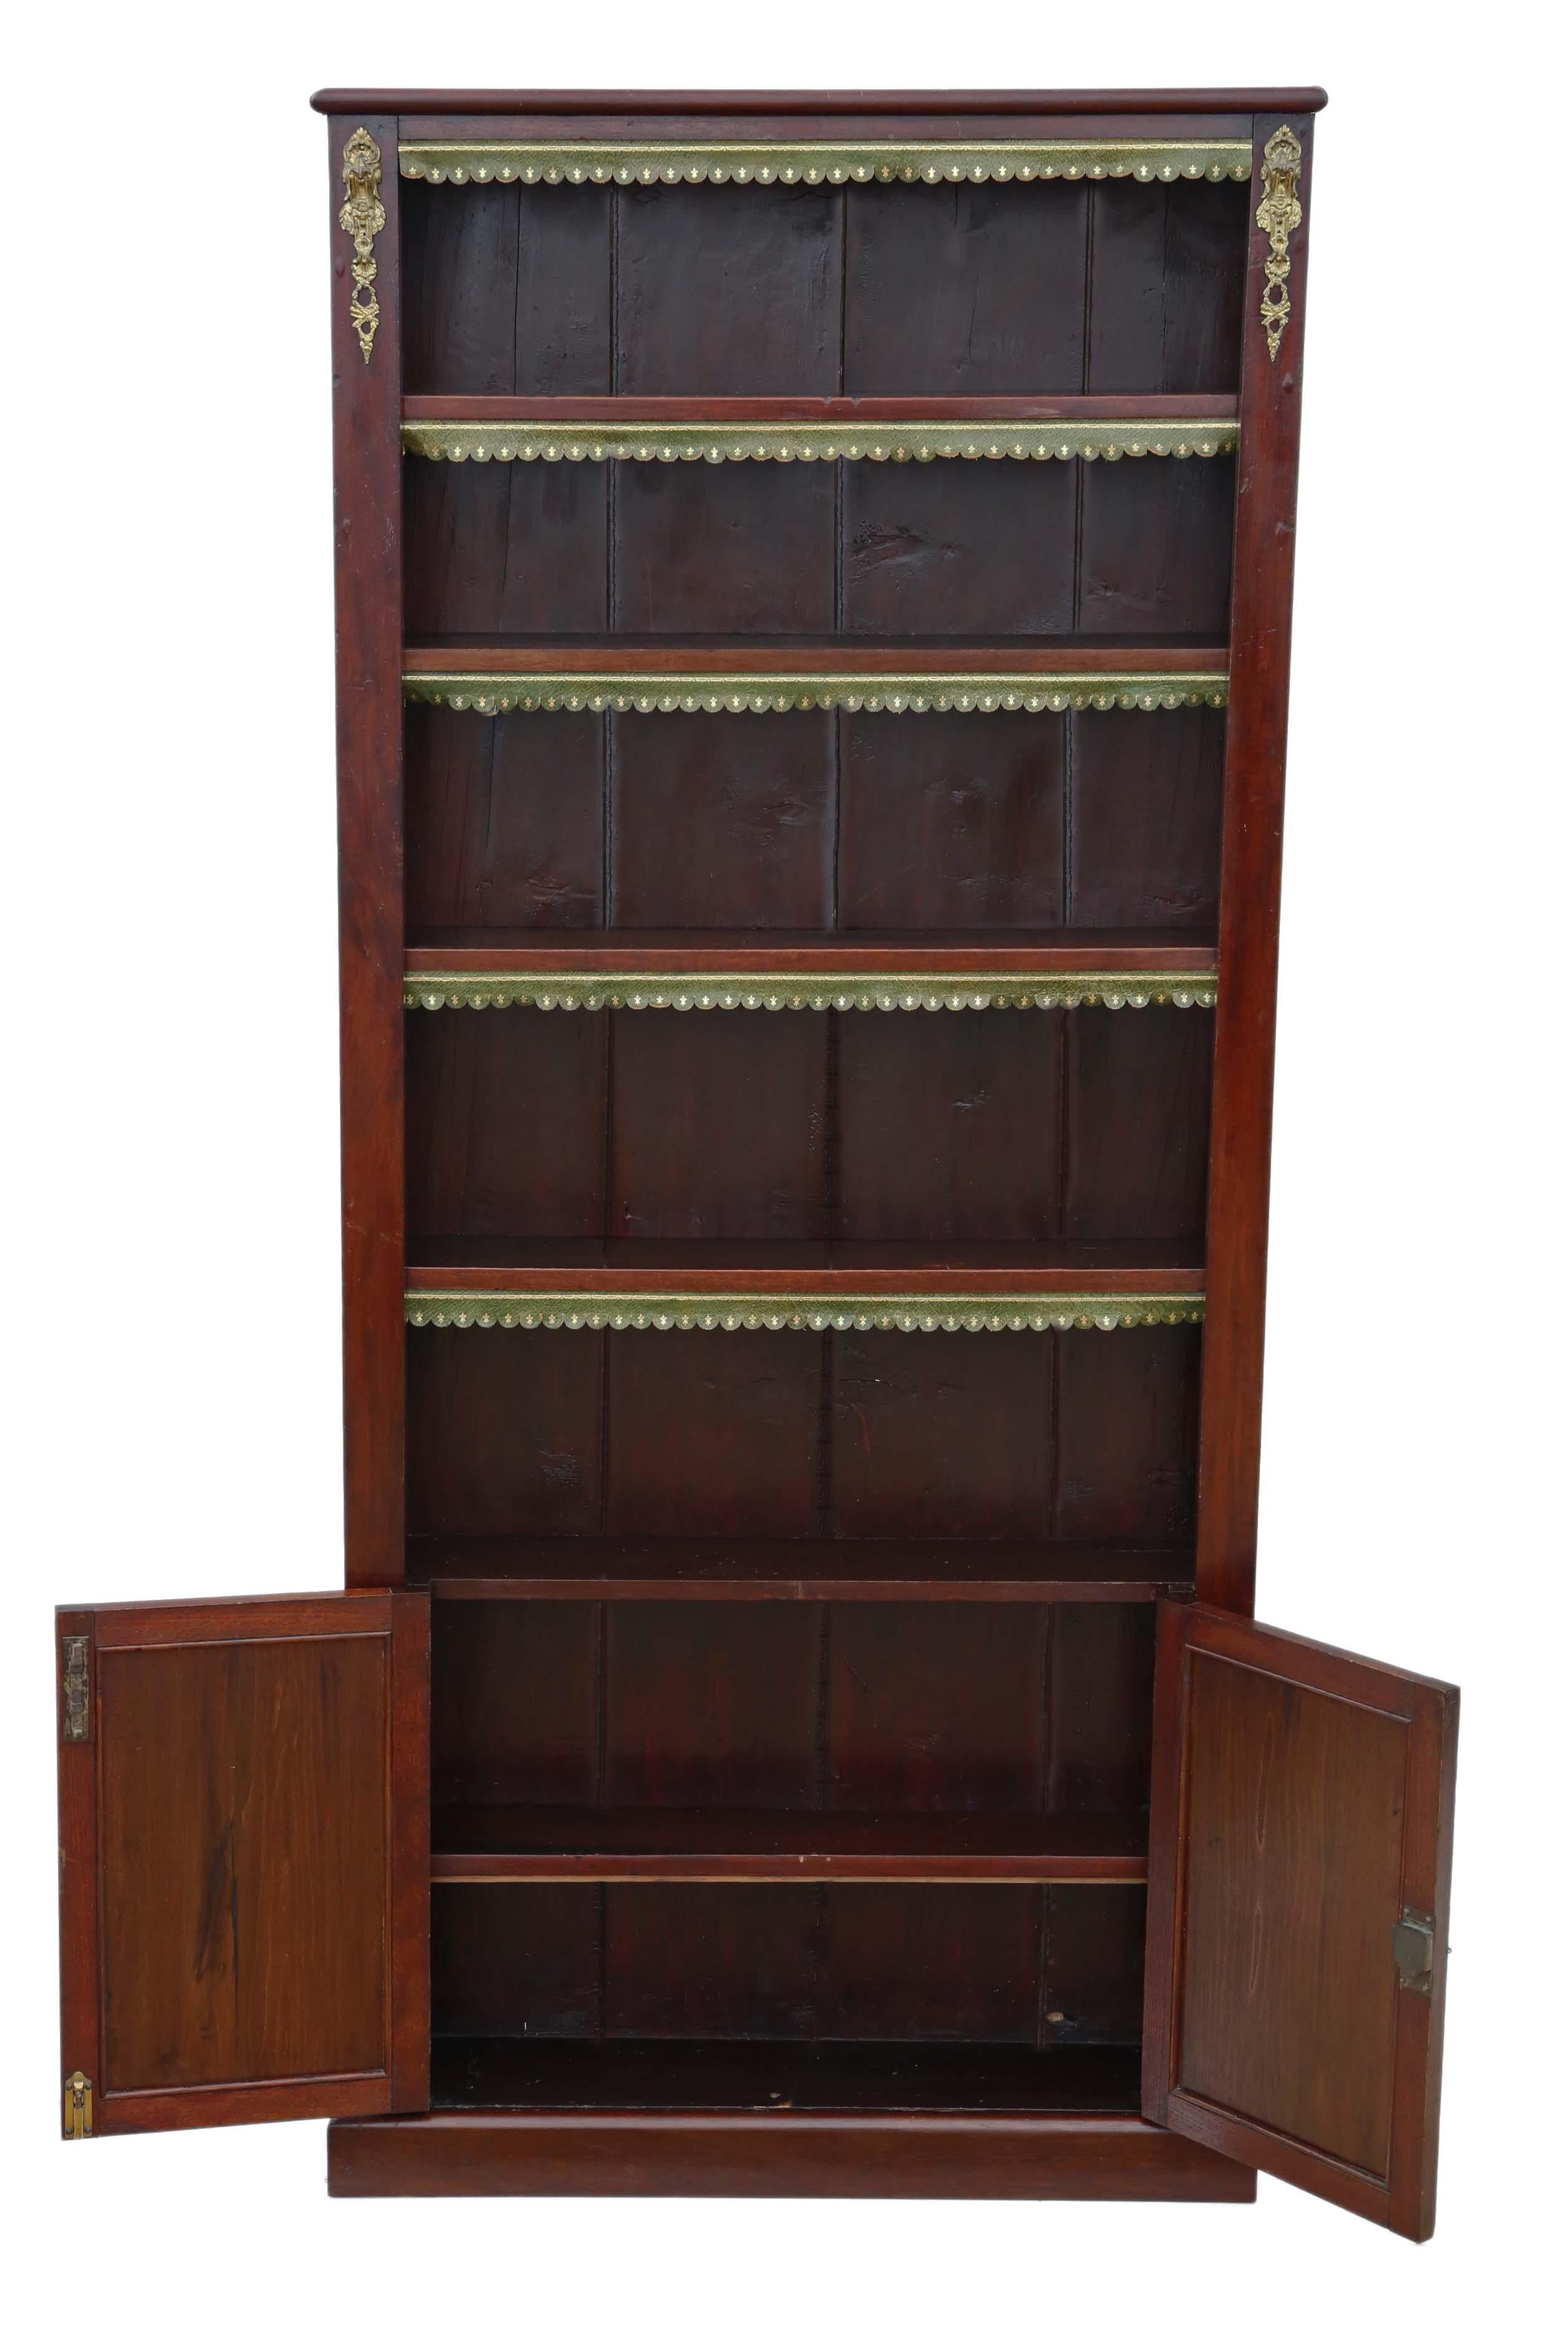 Antique quality Victorian circa 1890 and later tall adjustable bookcase.
Solid and strong, with no loose joints. A lovely quality piece. We have a key.
Would look great in the right location!
Overall maximum dimensions: 91cm W x 21cm D x 200cm H.